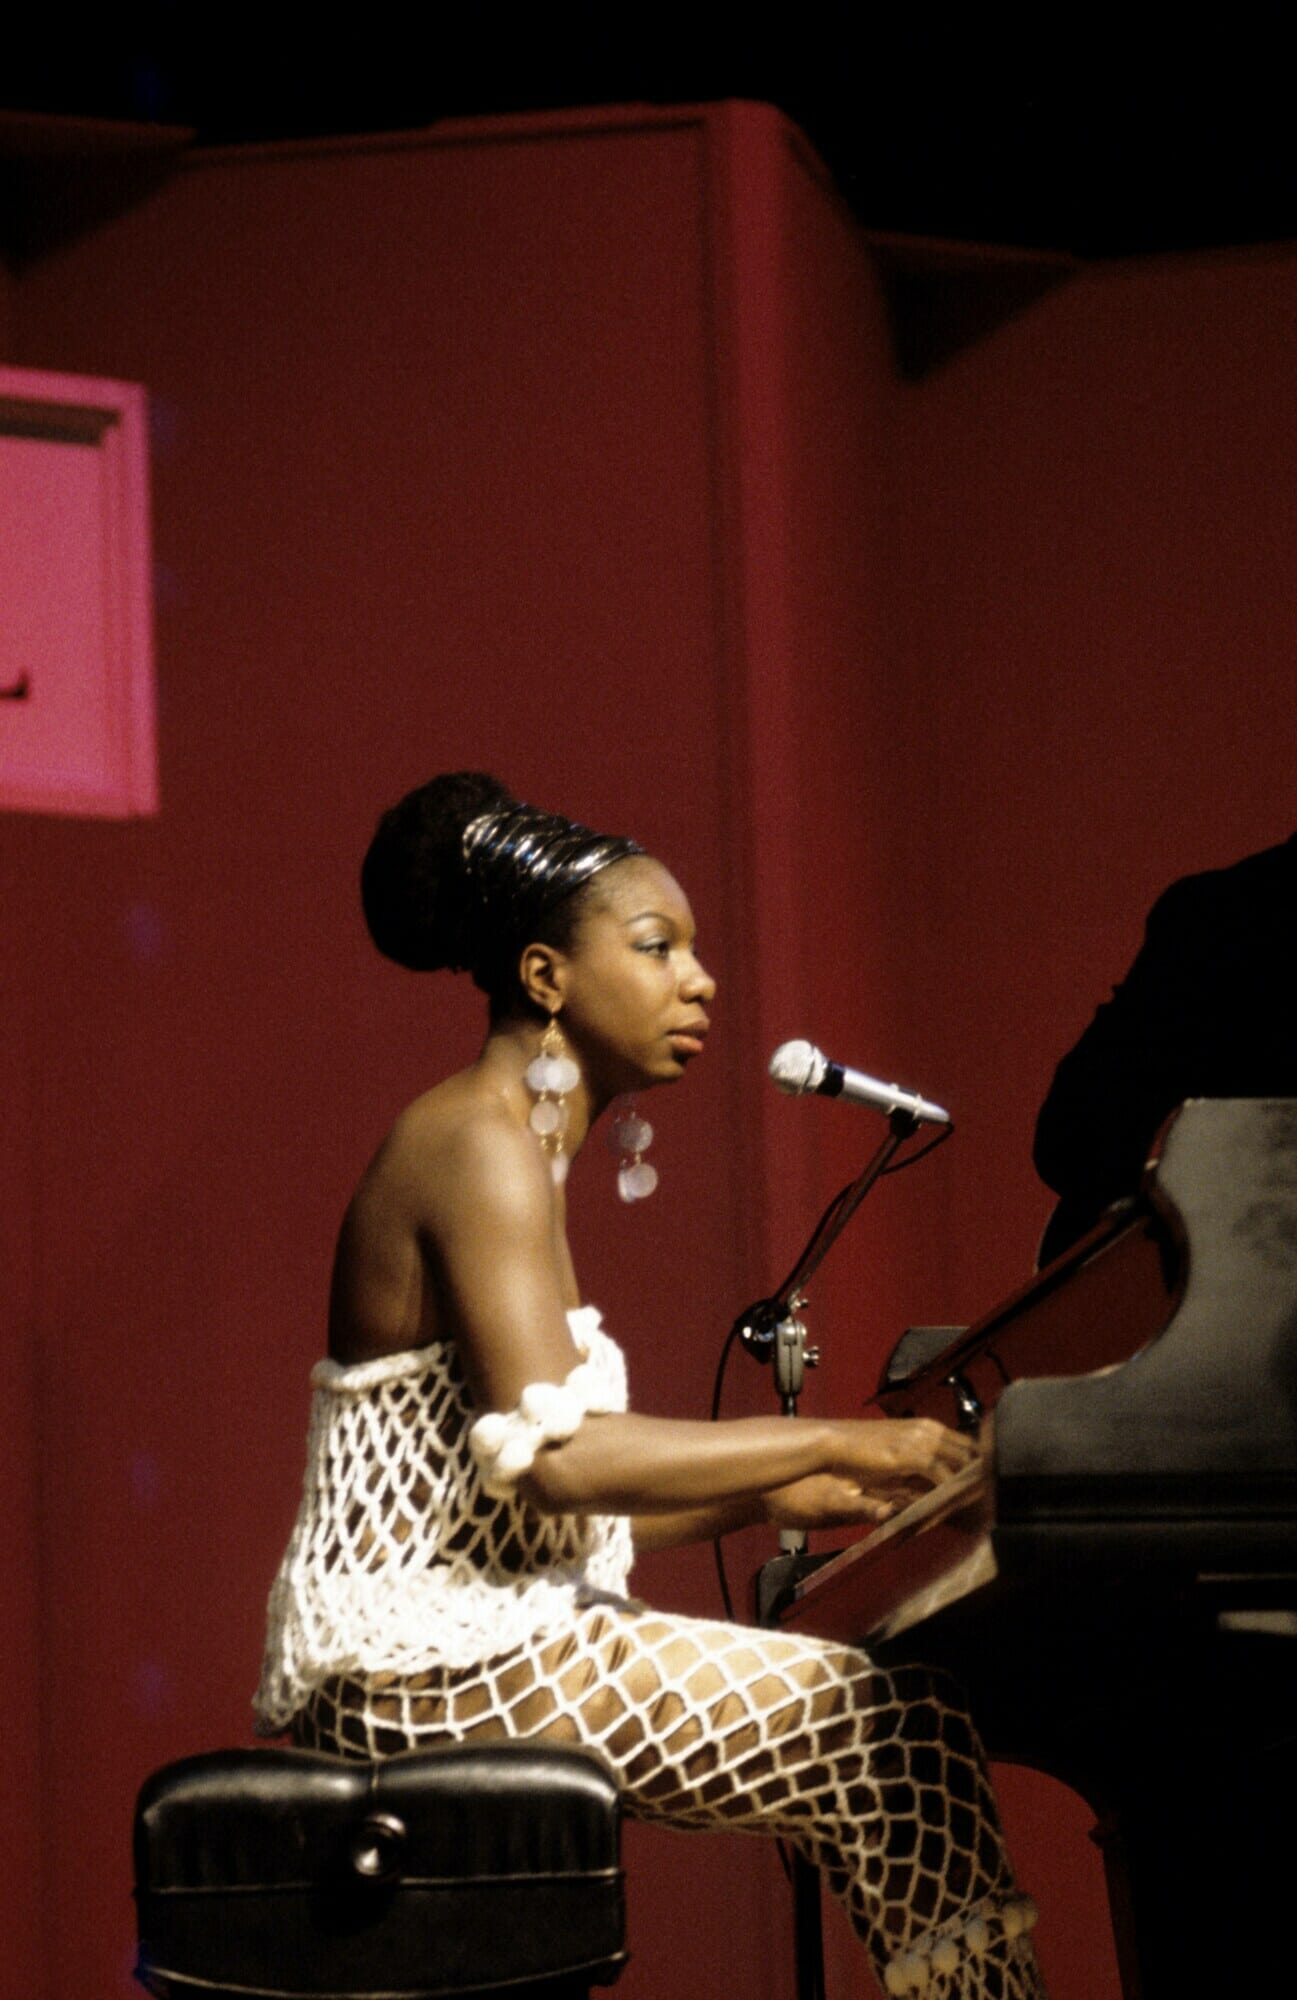 Nina Simone sitting at piano with microphone